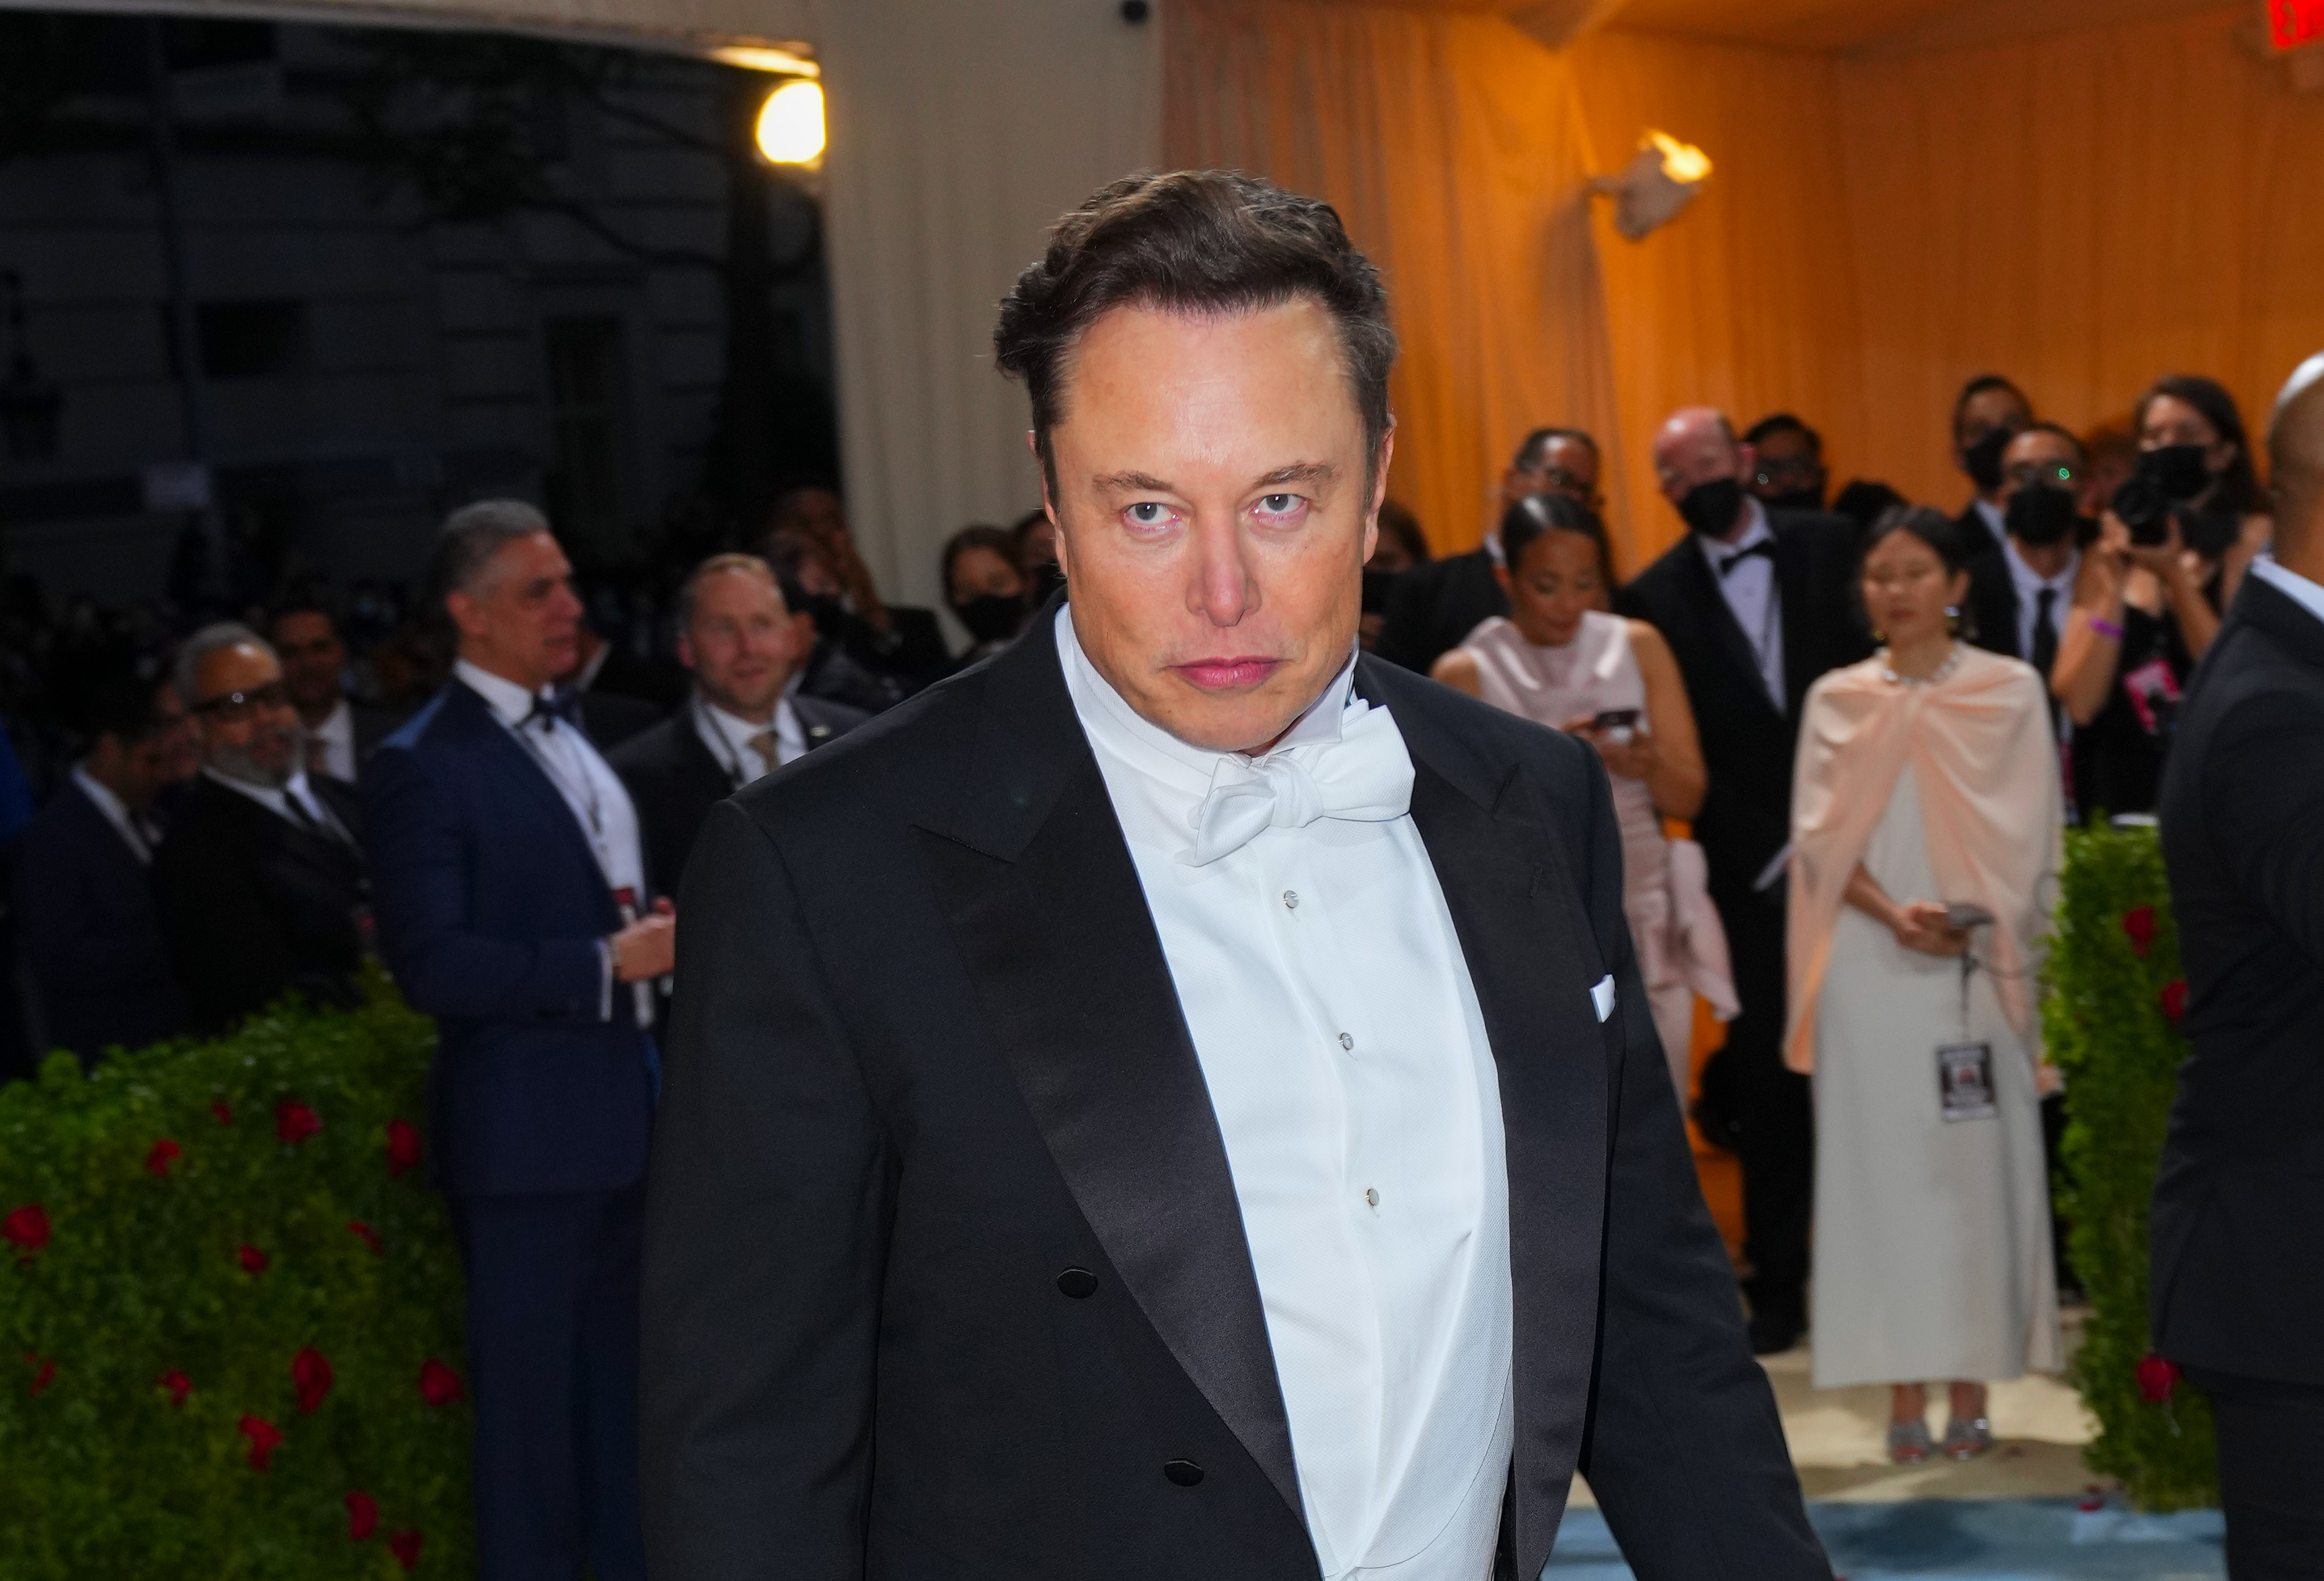 A photo of Elon Musk in a tuxedo from the waist up with a serious expression.